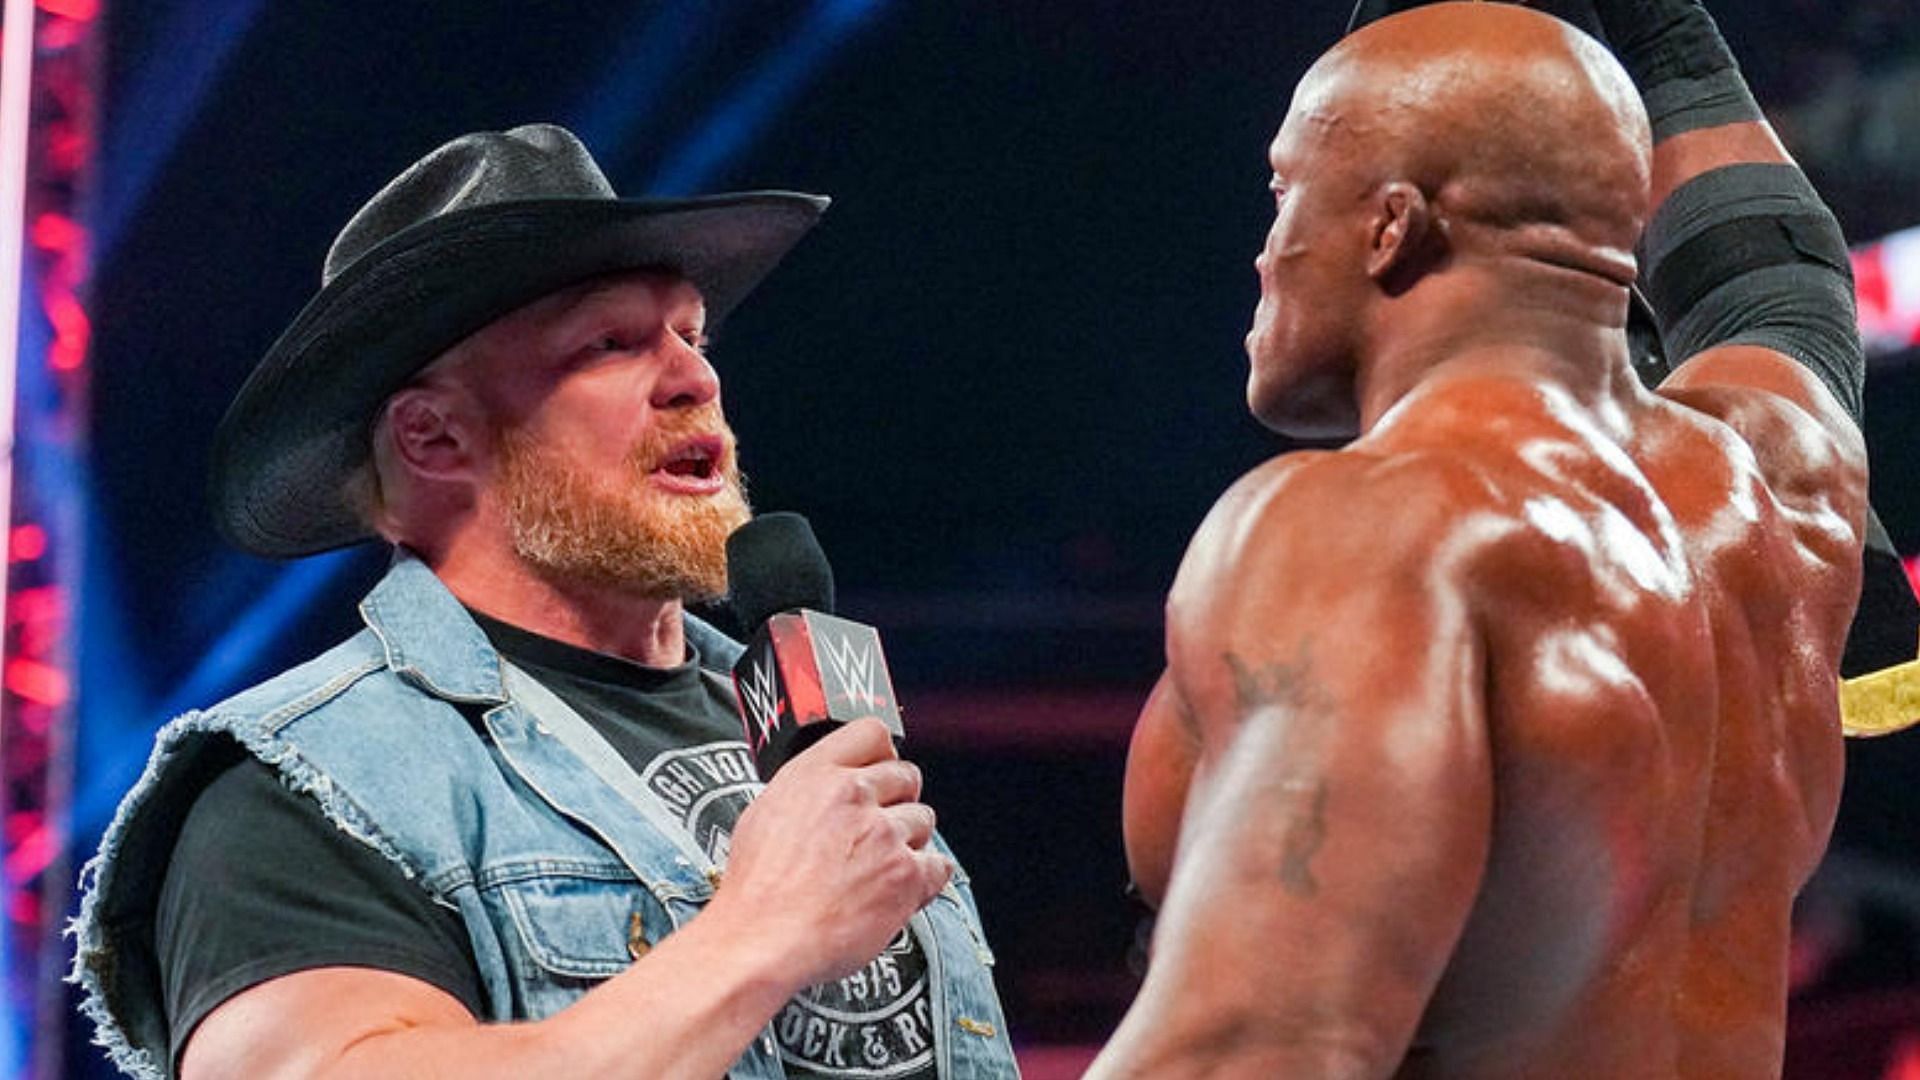 Brock Lesnar and Bobby Lashley are currently one apiece in singles competition.